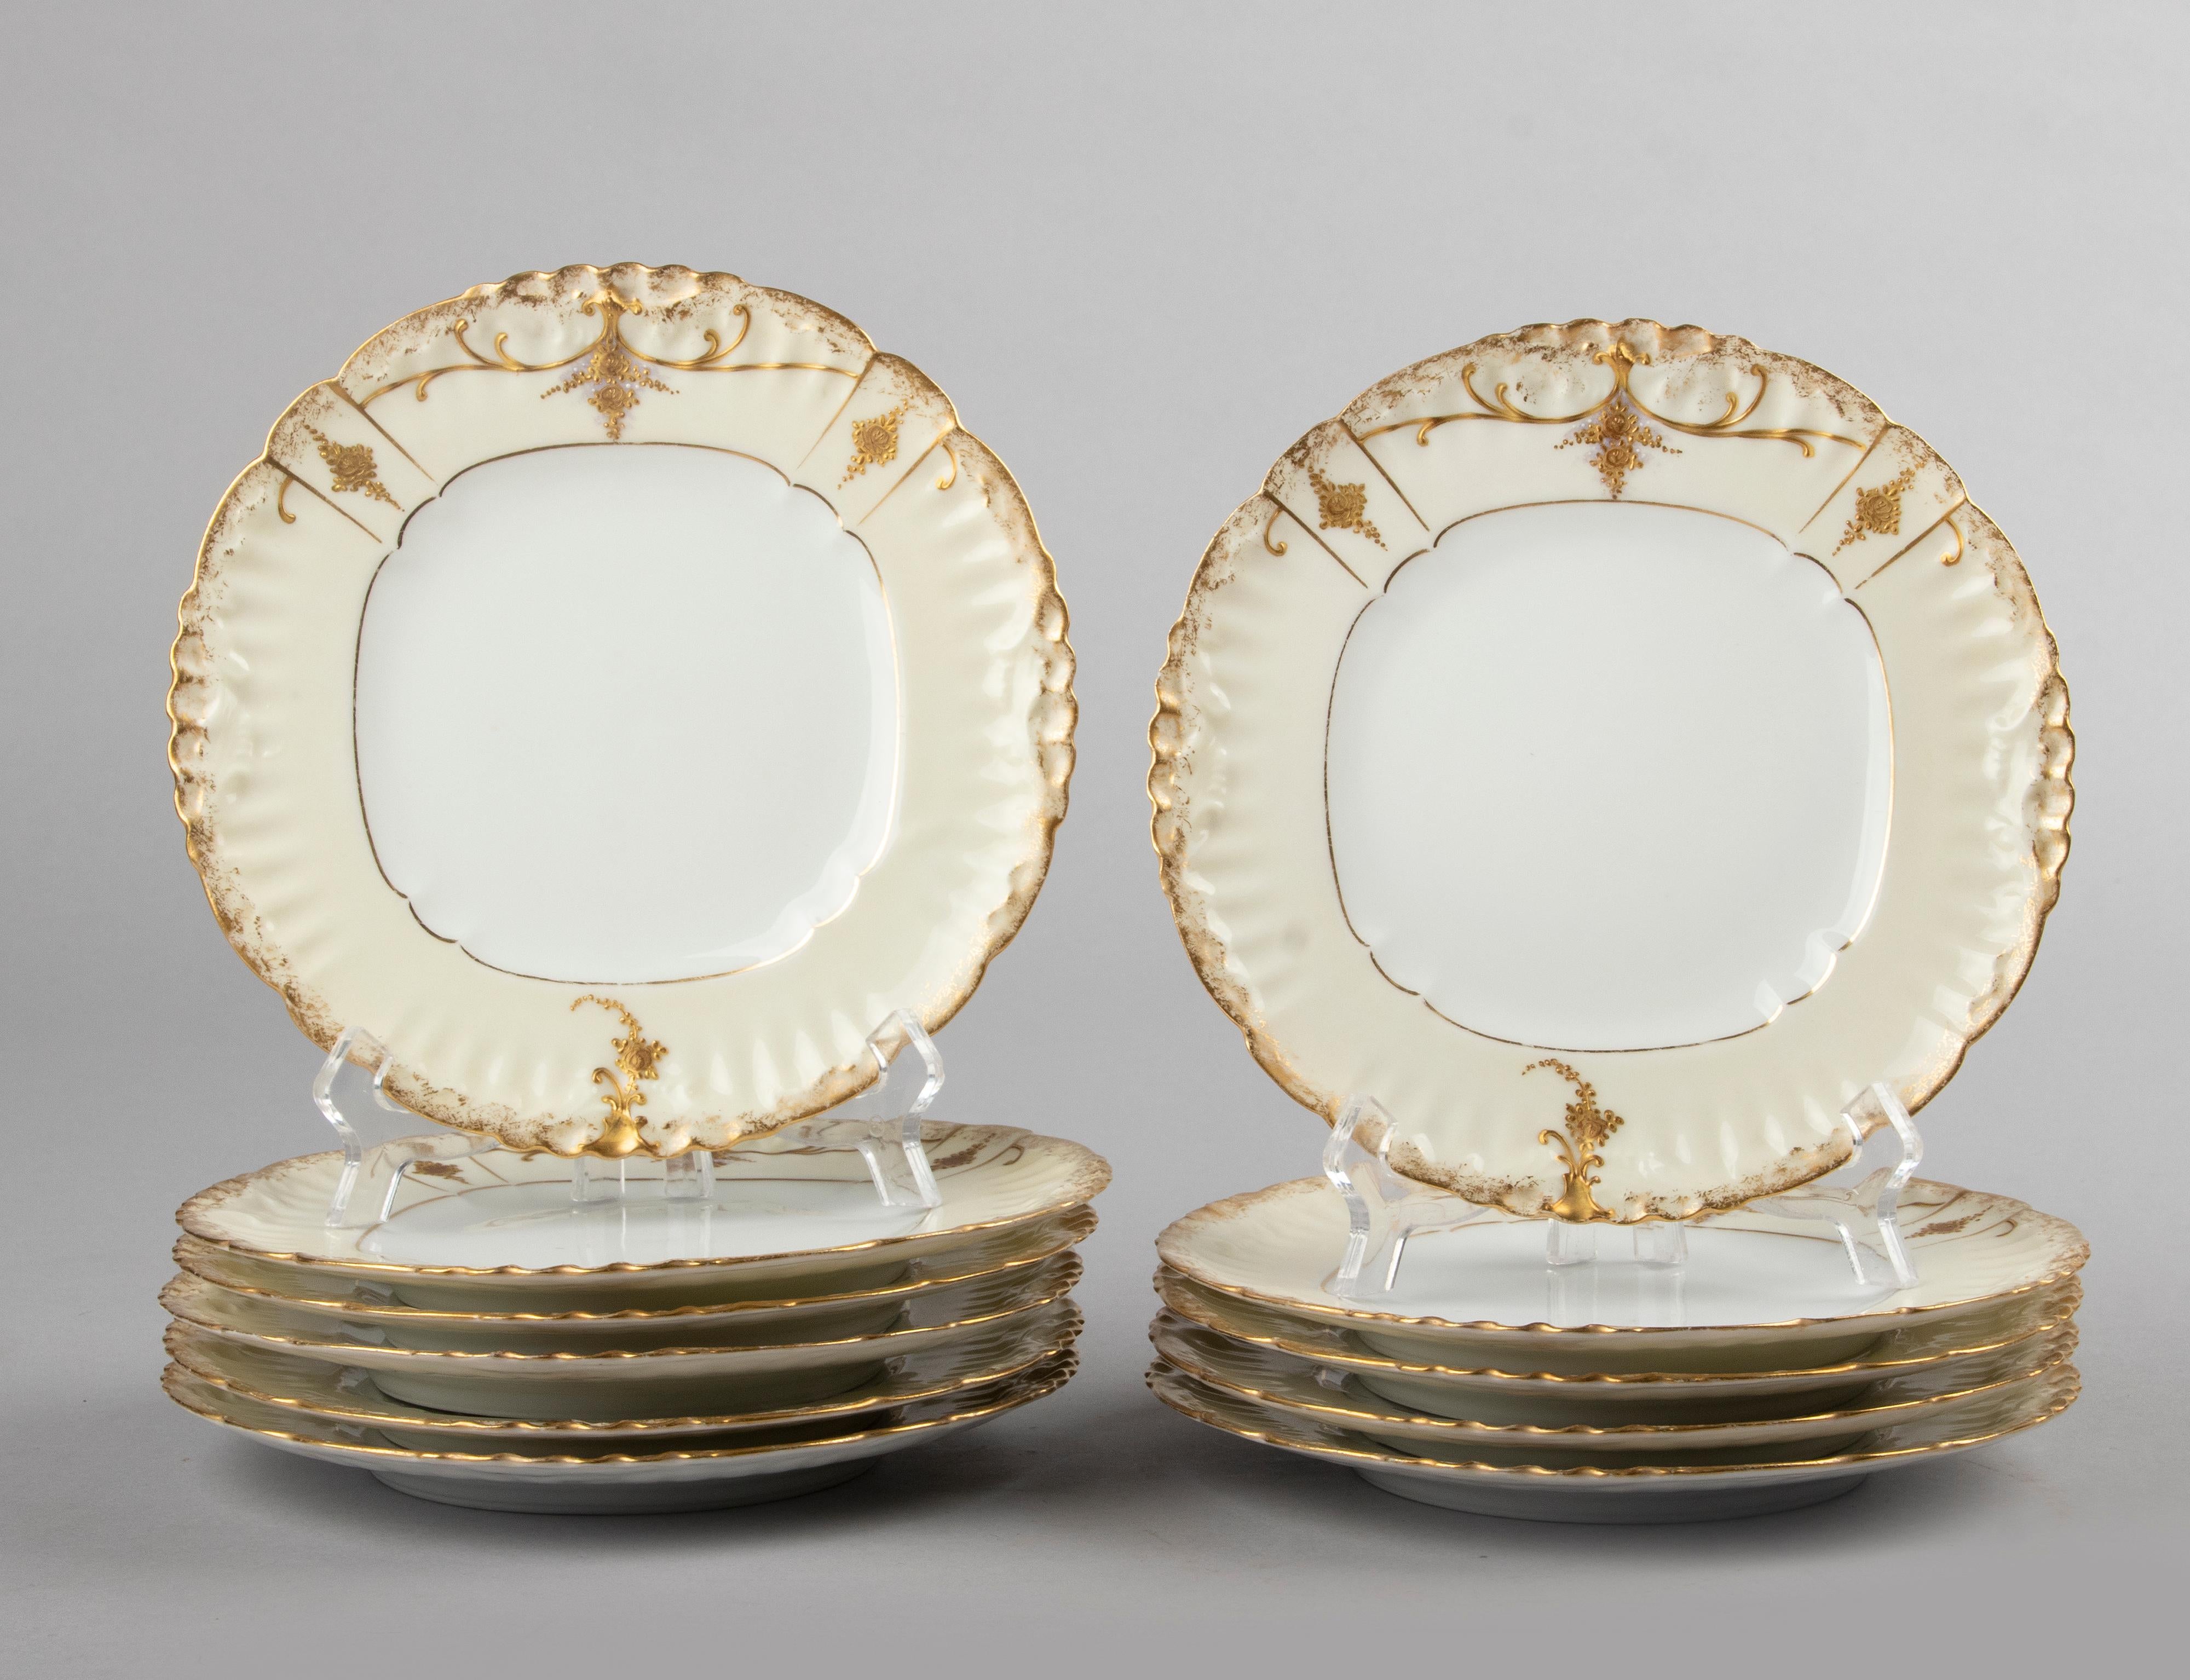 Beautiful set of eleven antique porcelain dessert plates from the French brand Limoges. The plates have beautiful gold-plated decoration in romantic Art Nouveau style. The plates date from about 1900. All in good condition. No chips and no